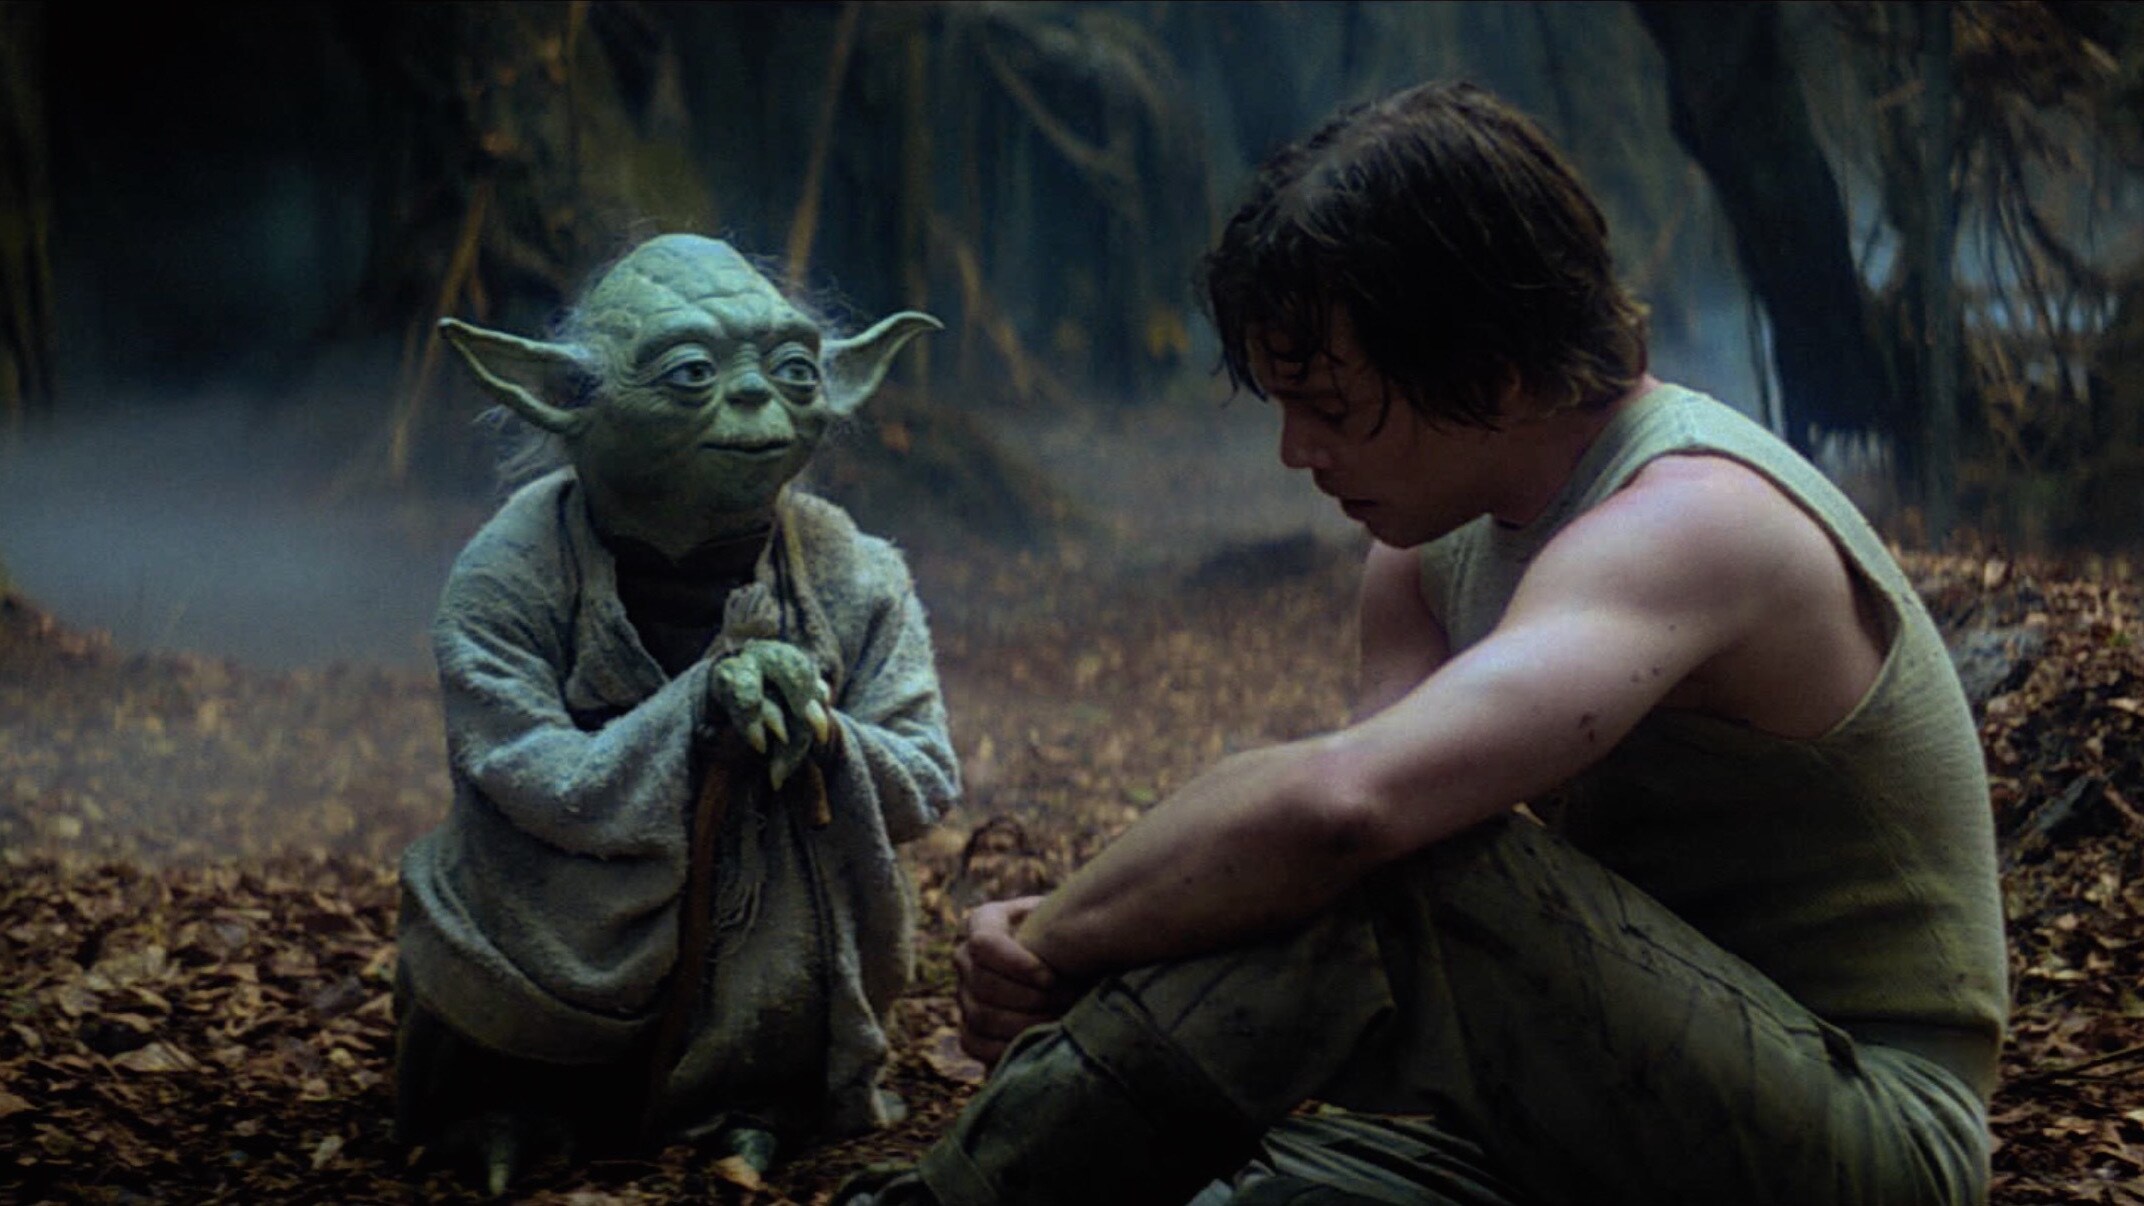 Parenting Padawans: 6 Star Wars Role Models to Learn From